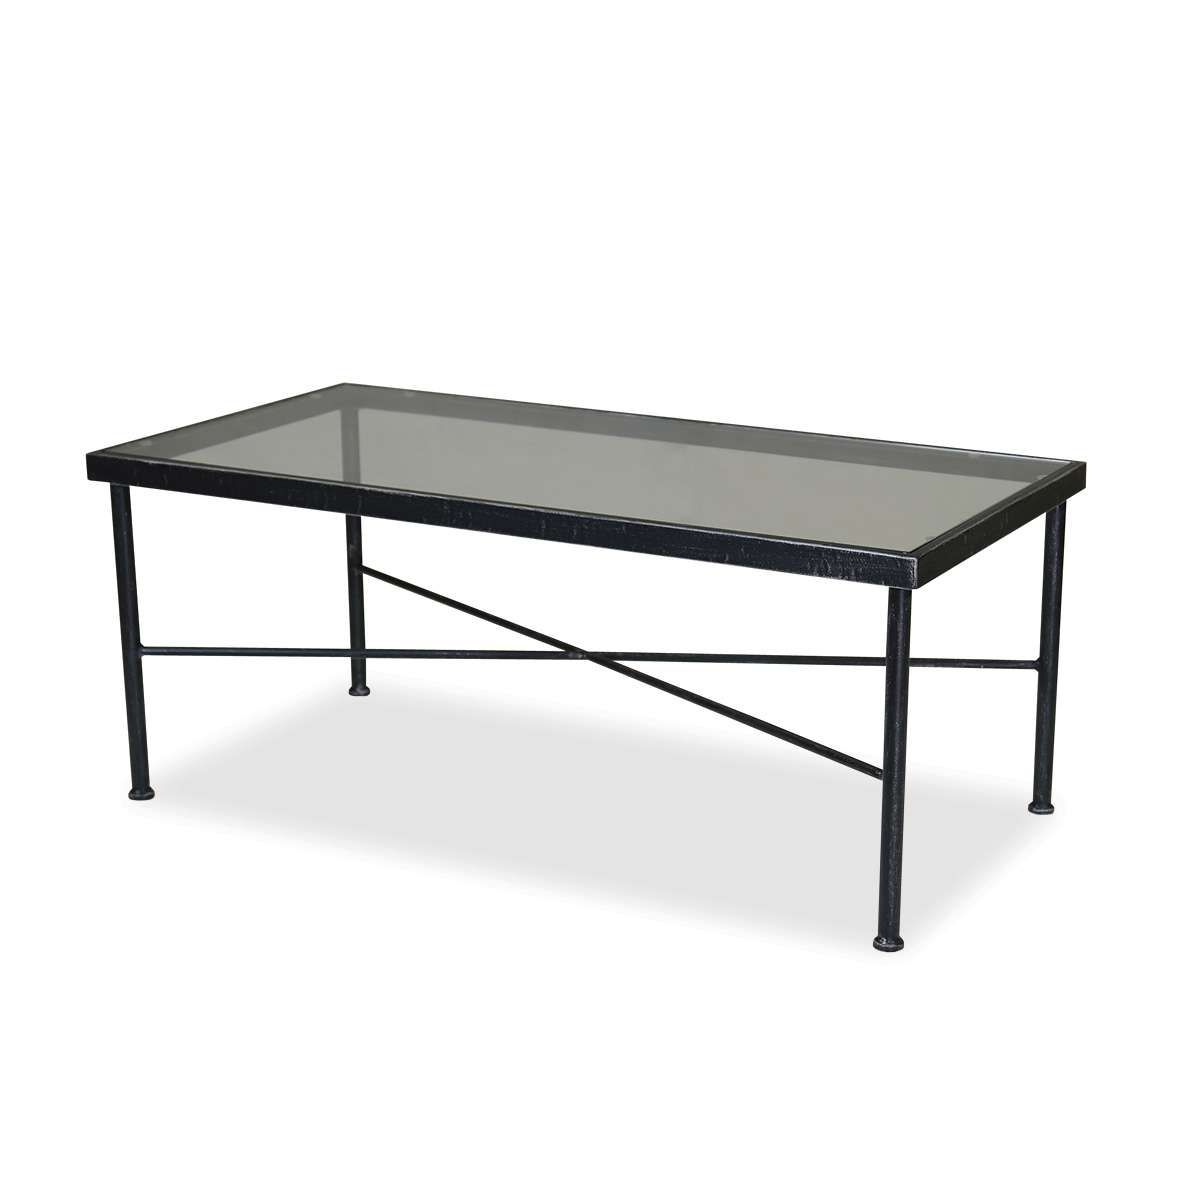 Popular Wrought Iron Coffee Tables With Regard To Wrought Iron Coffee Table (View 2 of 20)